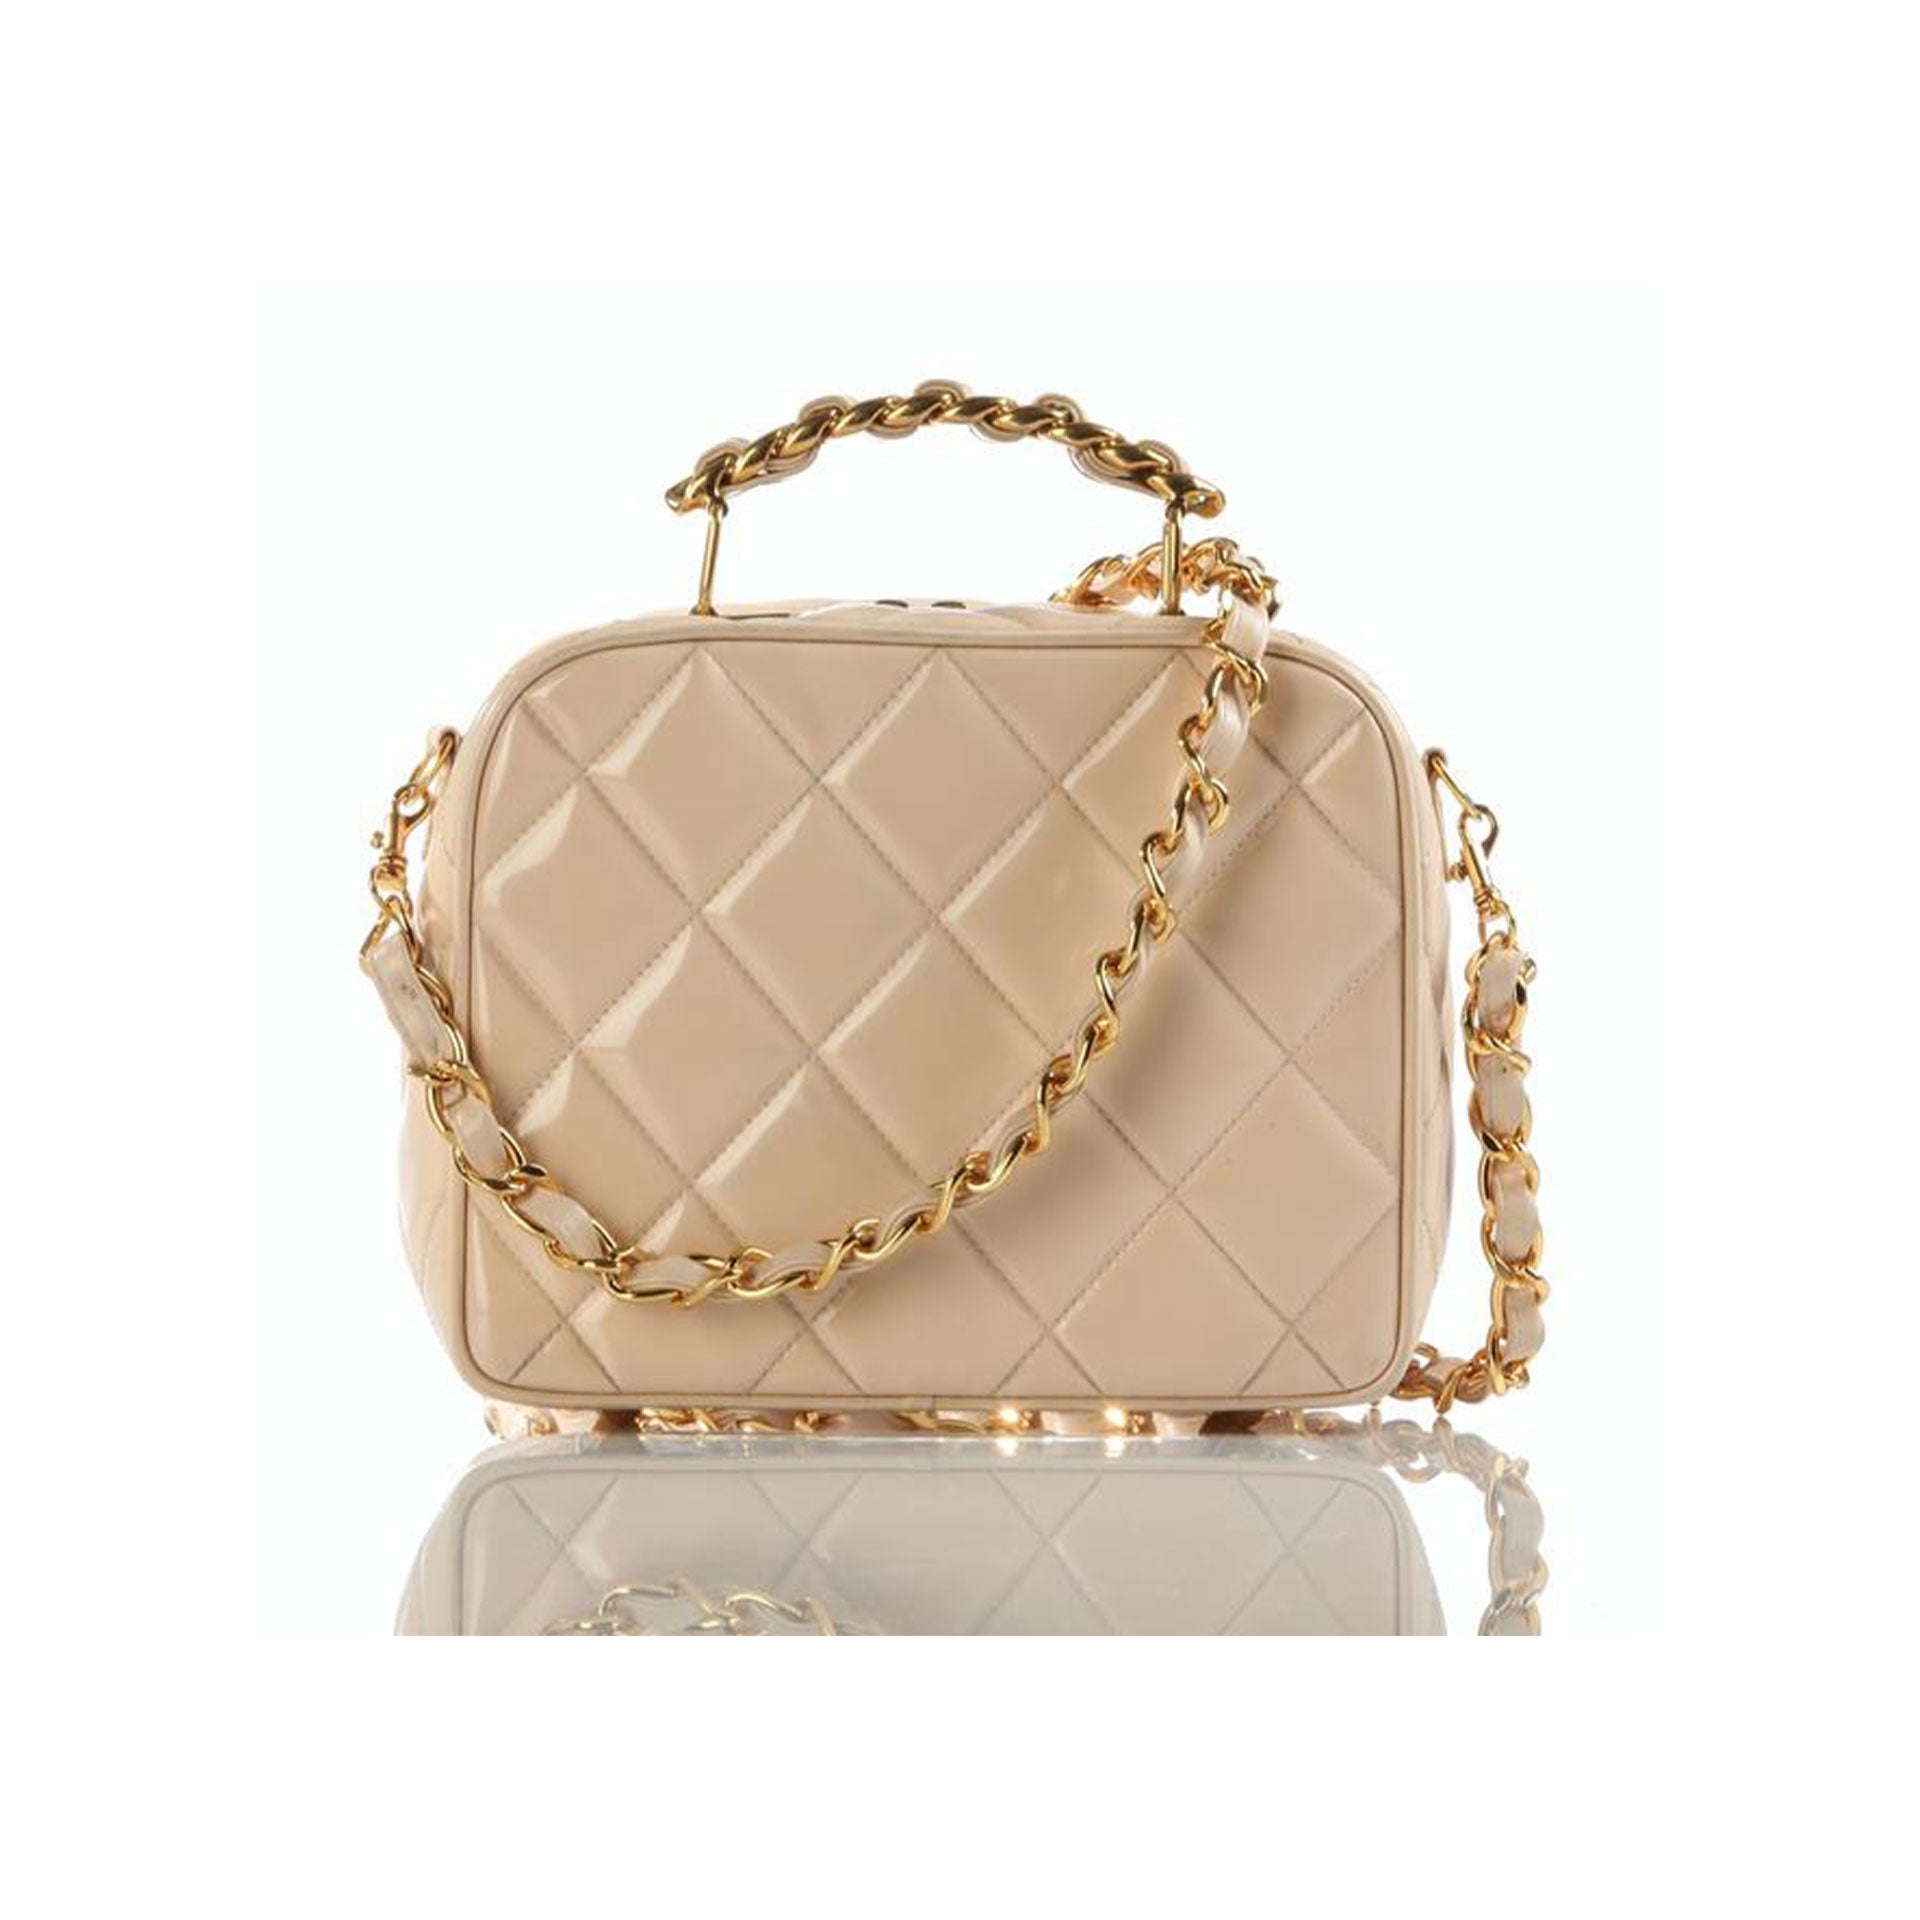 Chanel Camera Mini Quilted Vintage Rare Beige Nude Patent Cross Body Bag